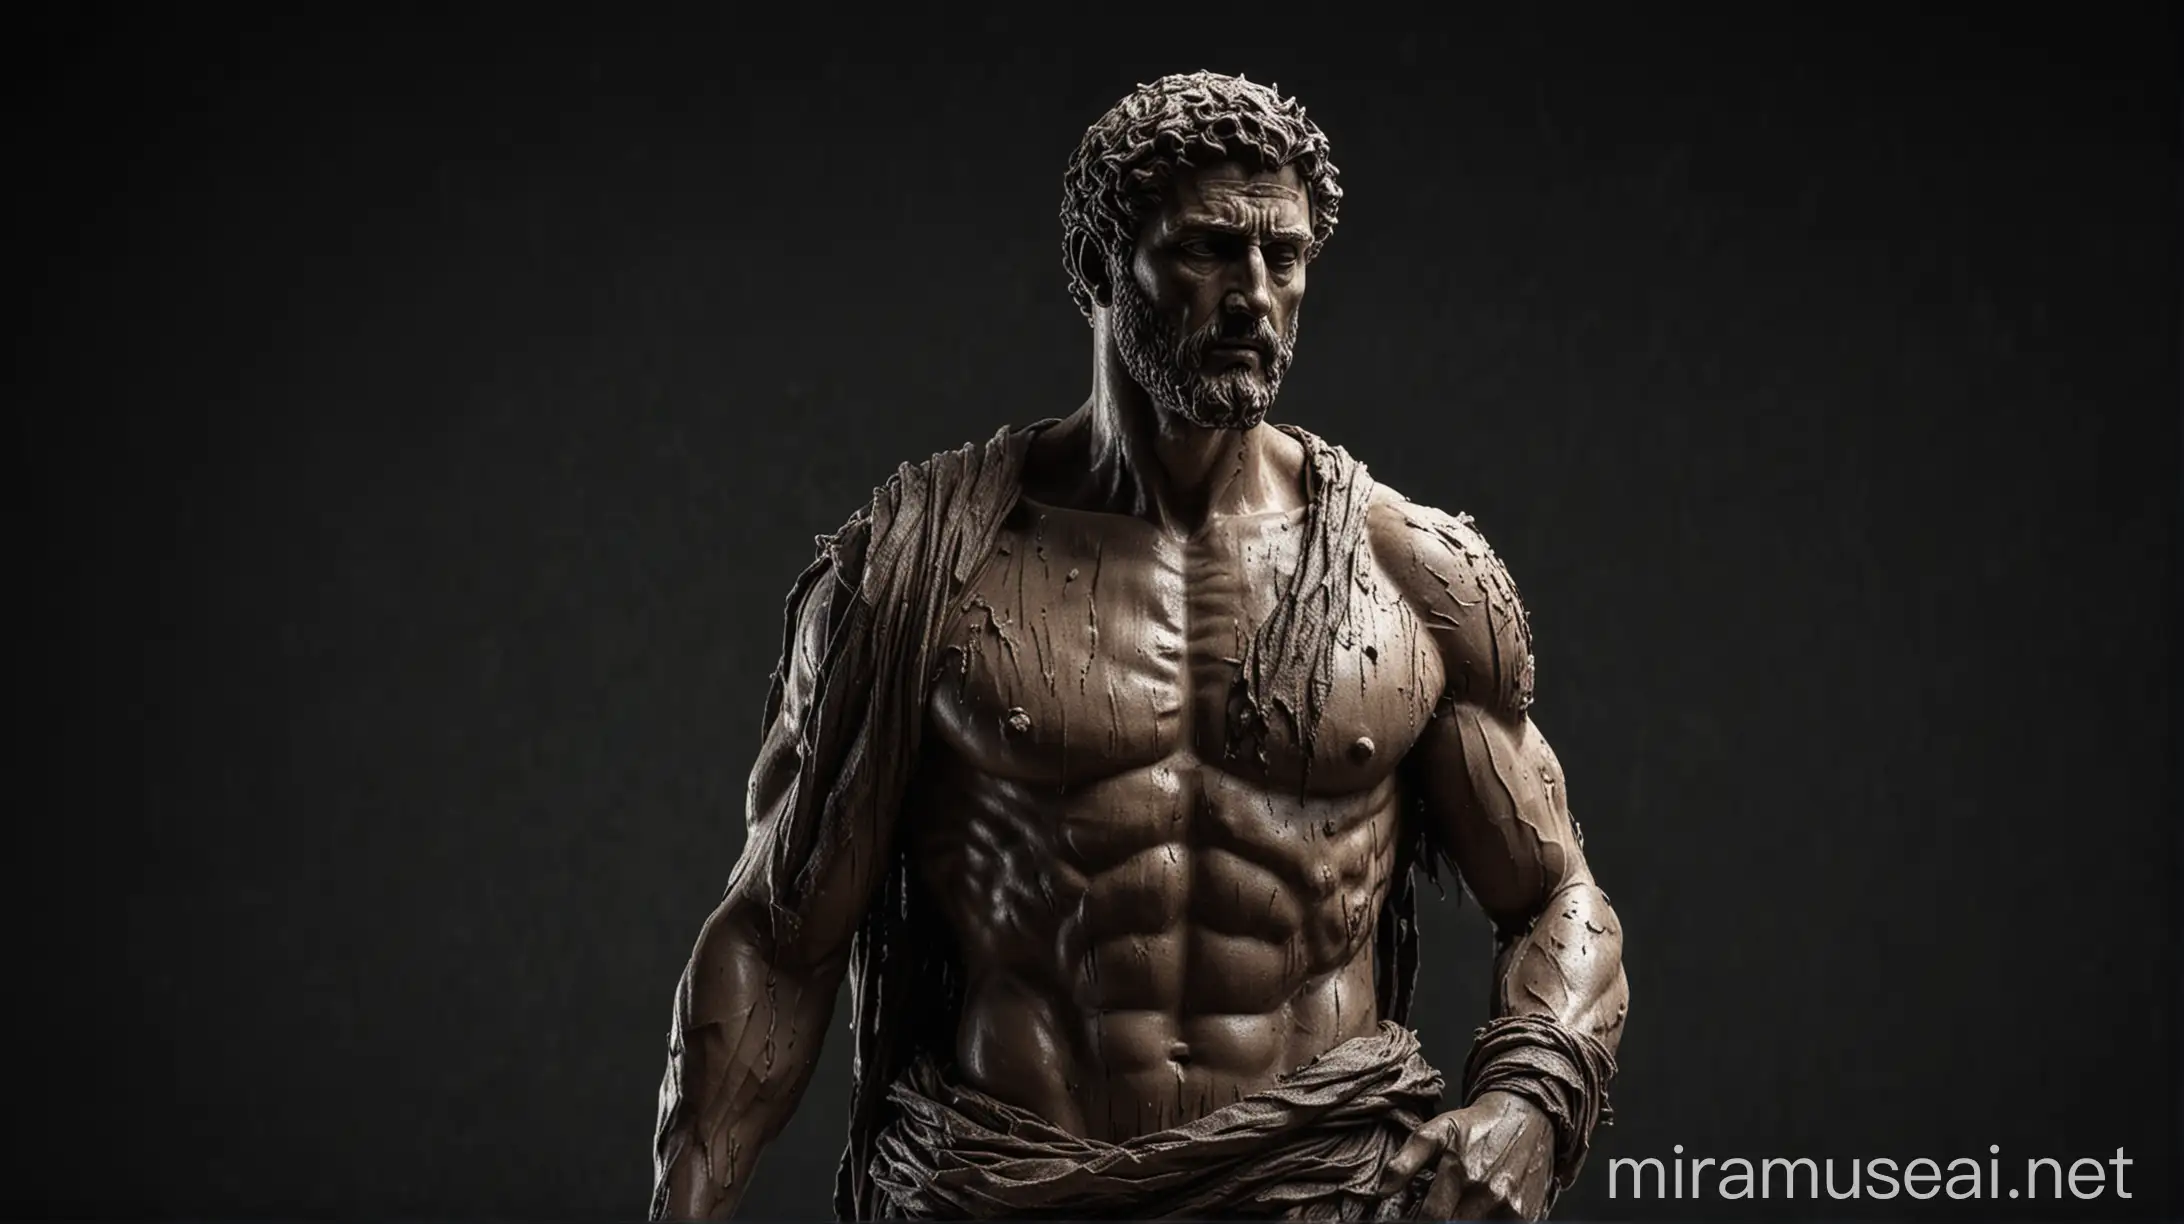 Stoic Man Statue Powerful Sculpture in Dynamic Lighting